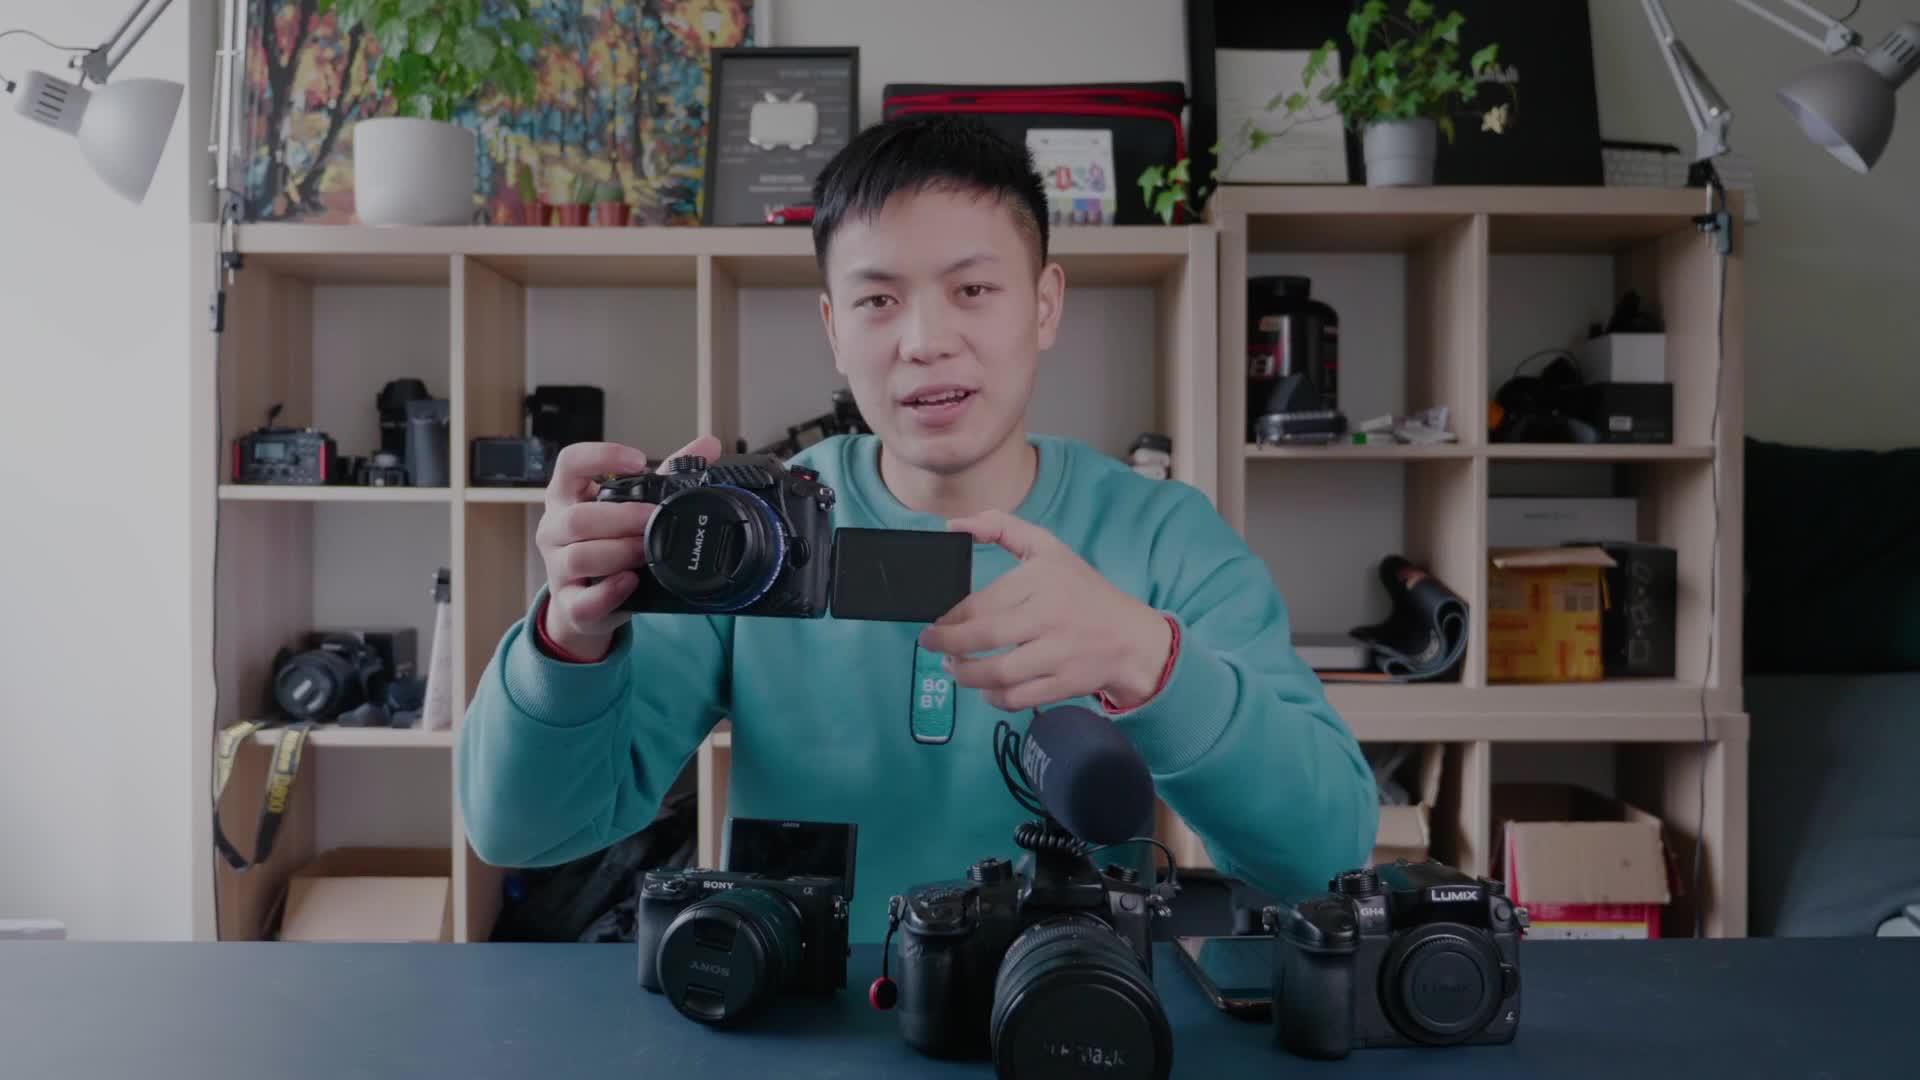 Sony Announces the a7S III, With 4K/120p and a 9.44M-dot EVF